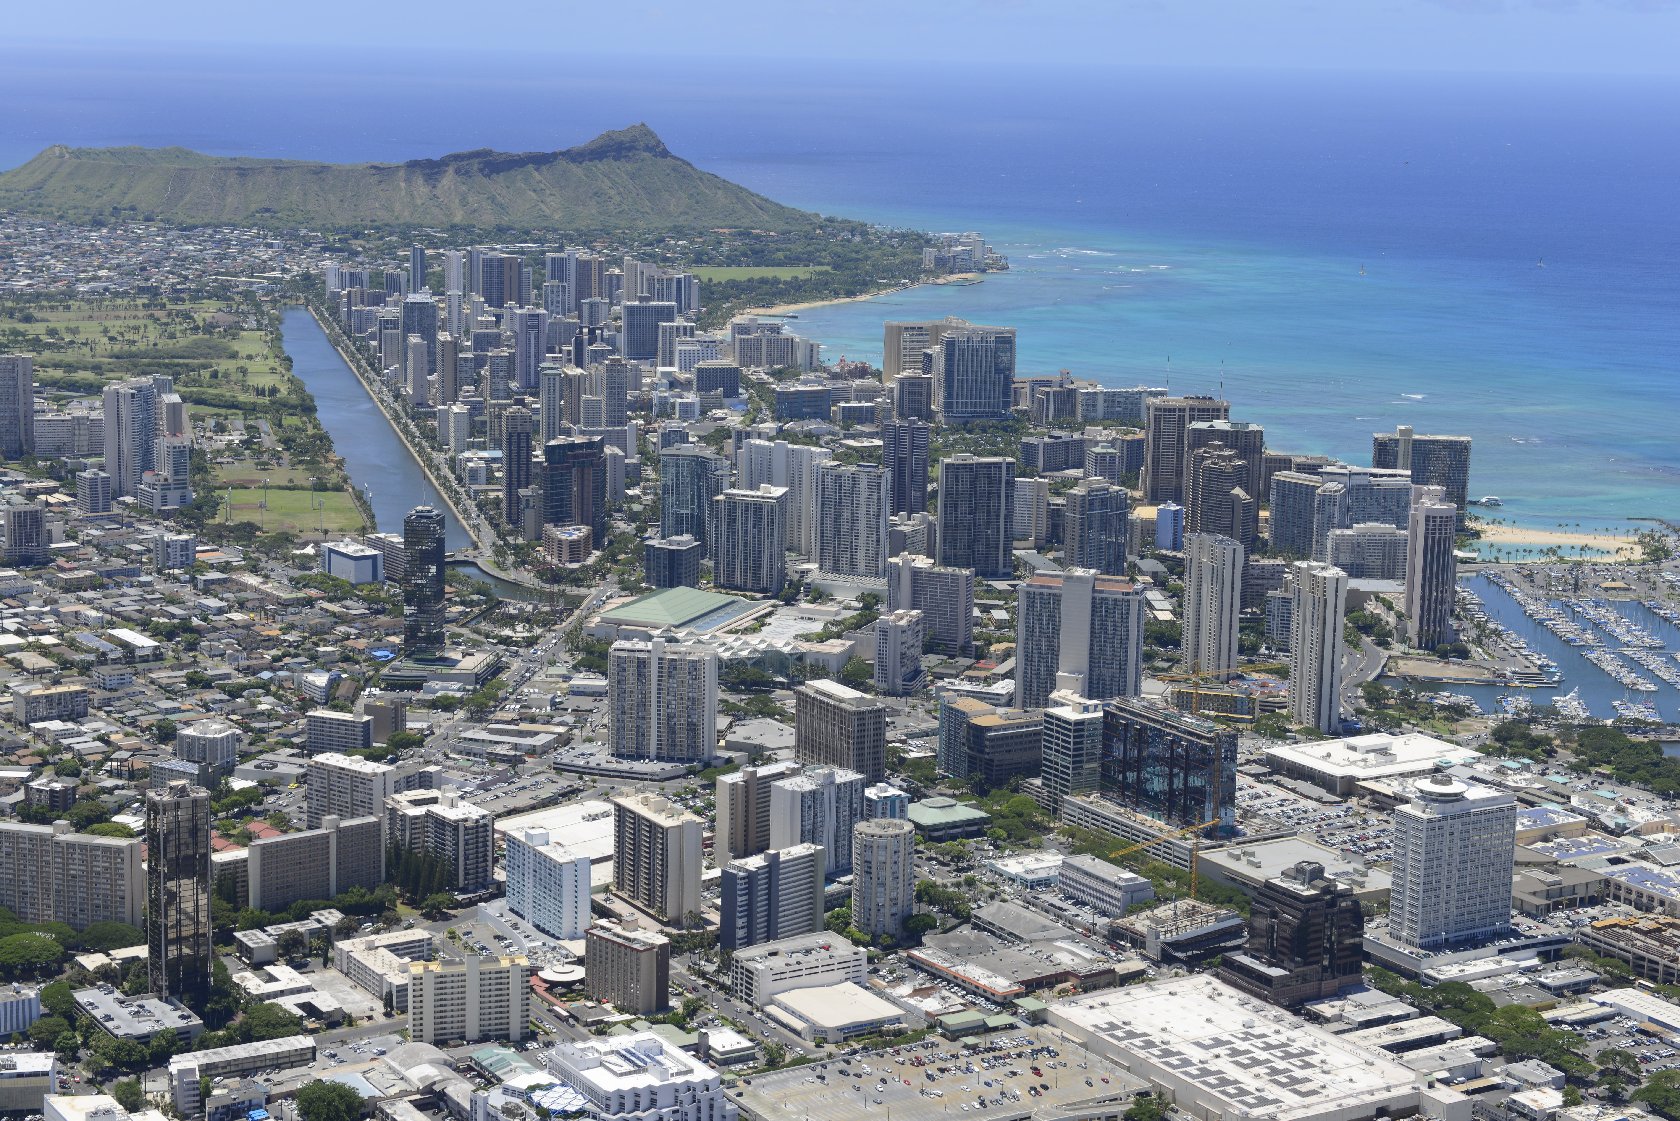 Oahu, Honolulu Aerial view of the city with the ocean shore and Diamond Head Crater in the background